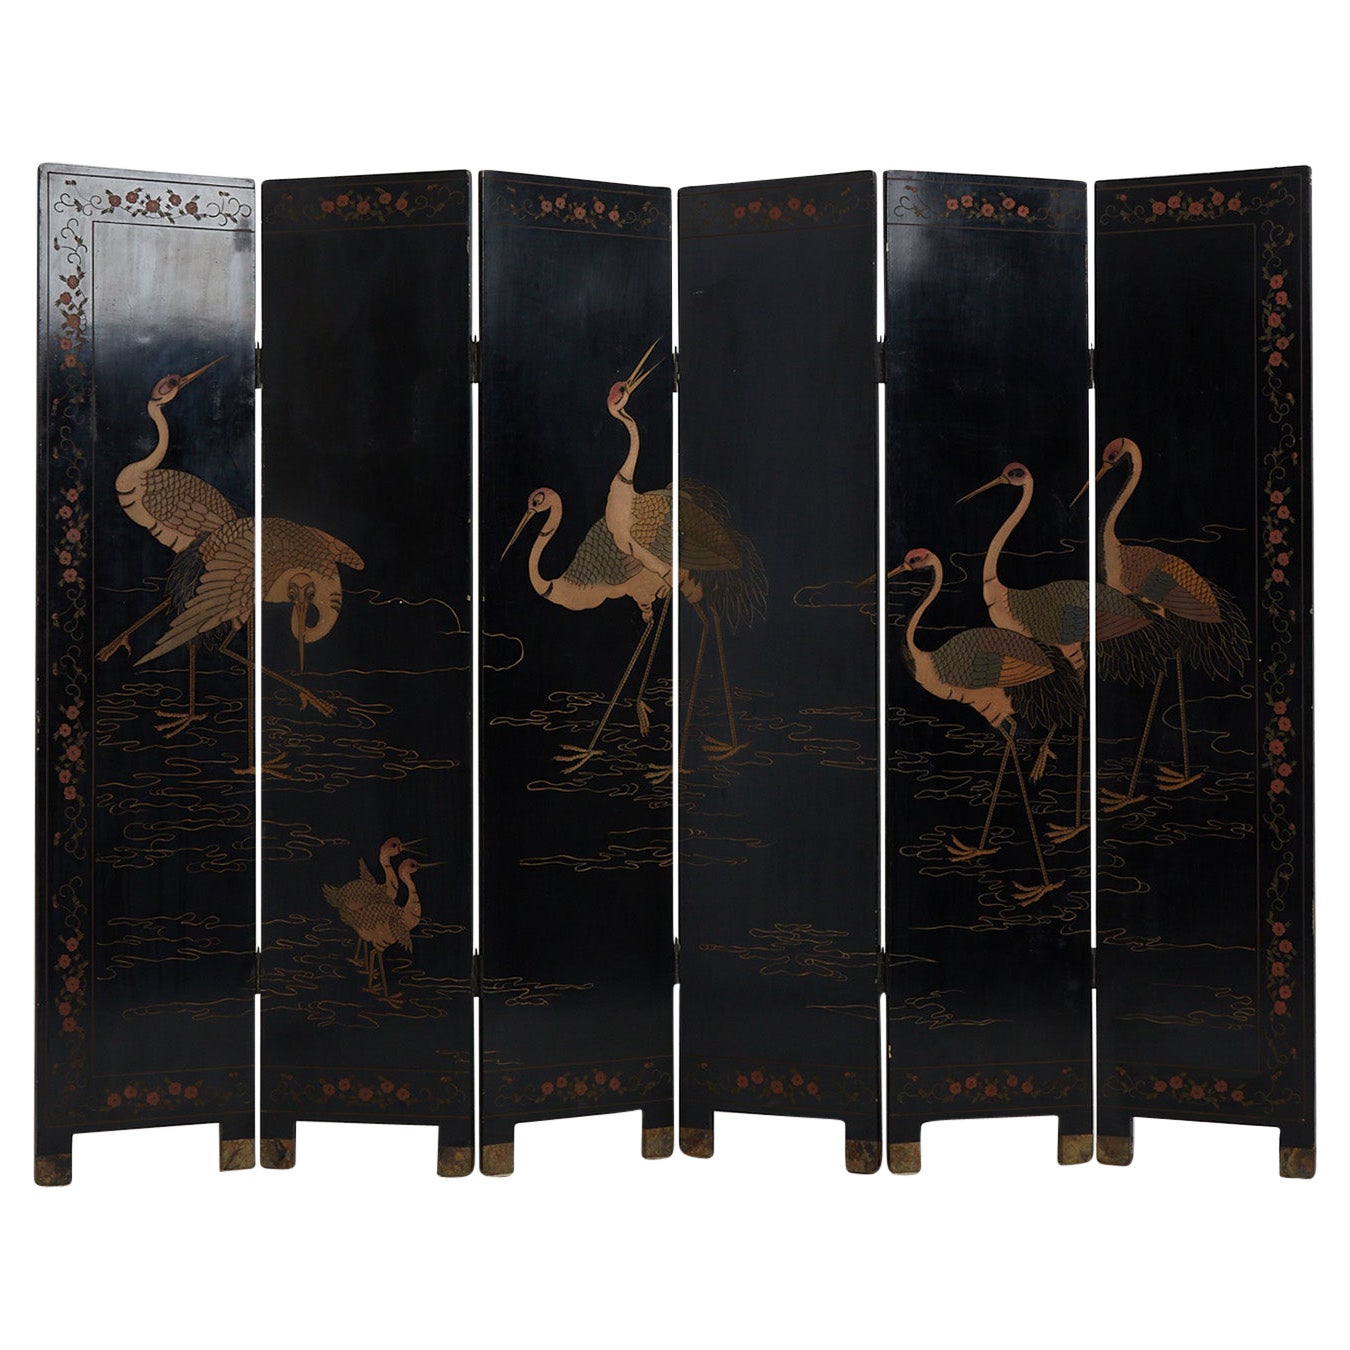 Coromandel Lacquer 6 Leaf Chinese Screen